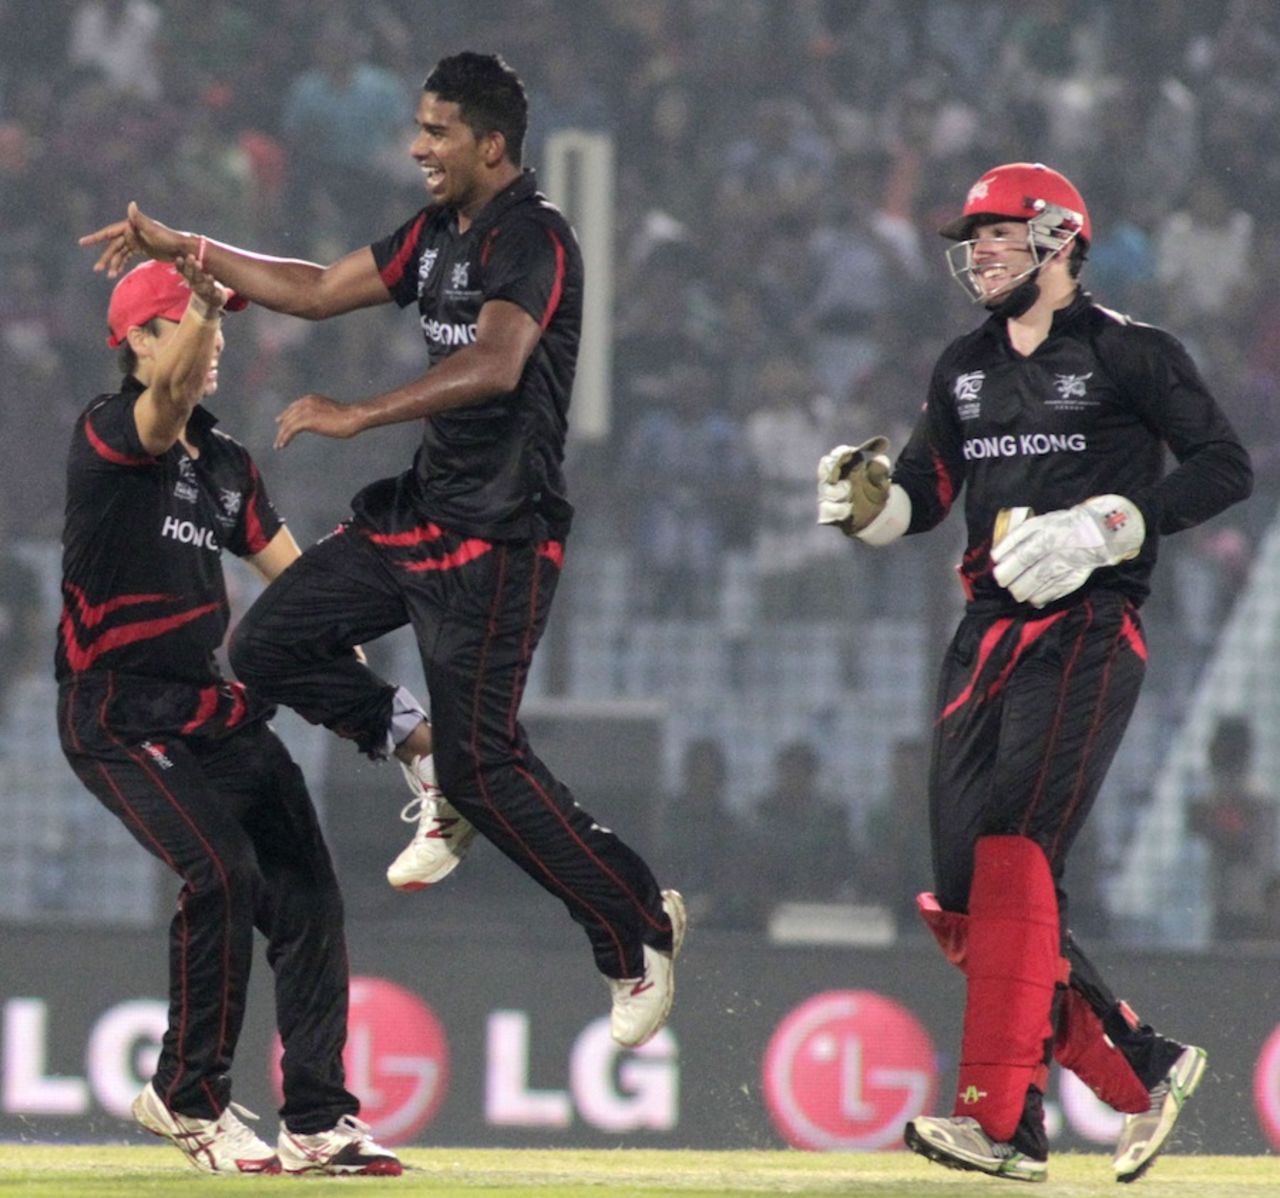 Nadeem Ahmed takes off after picking up one of his four wickets, Bangladesh v Hong Kong, World T20, Group A, Chittagong, March 20, 2014